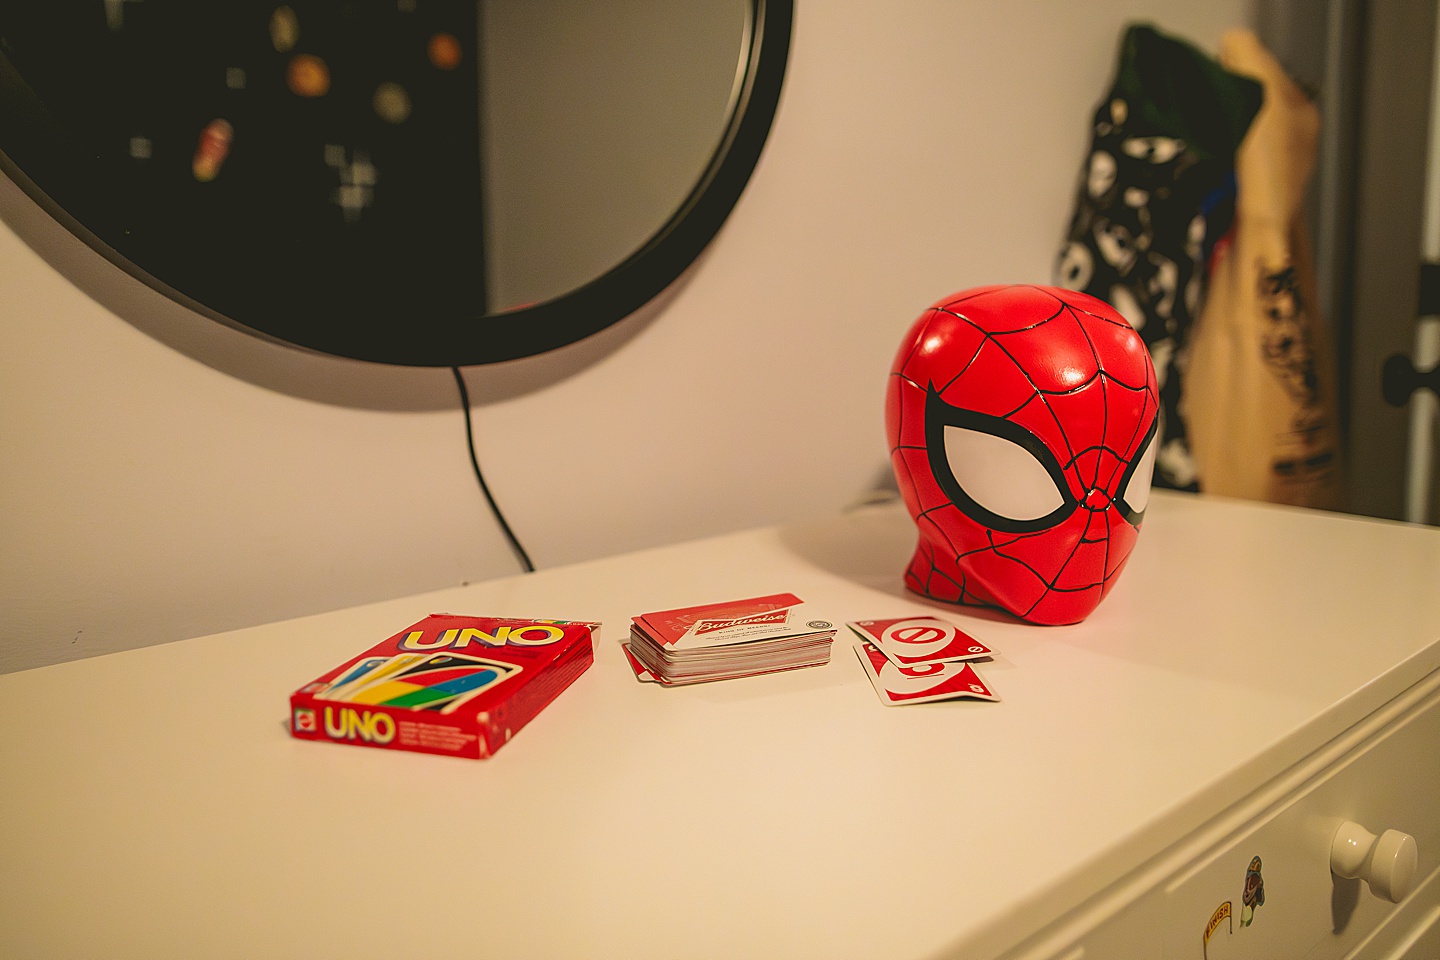 Spiderman head next to deck of Uno cards